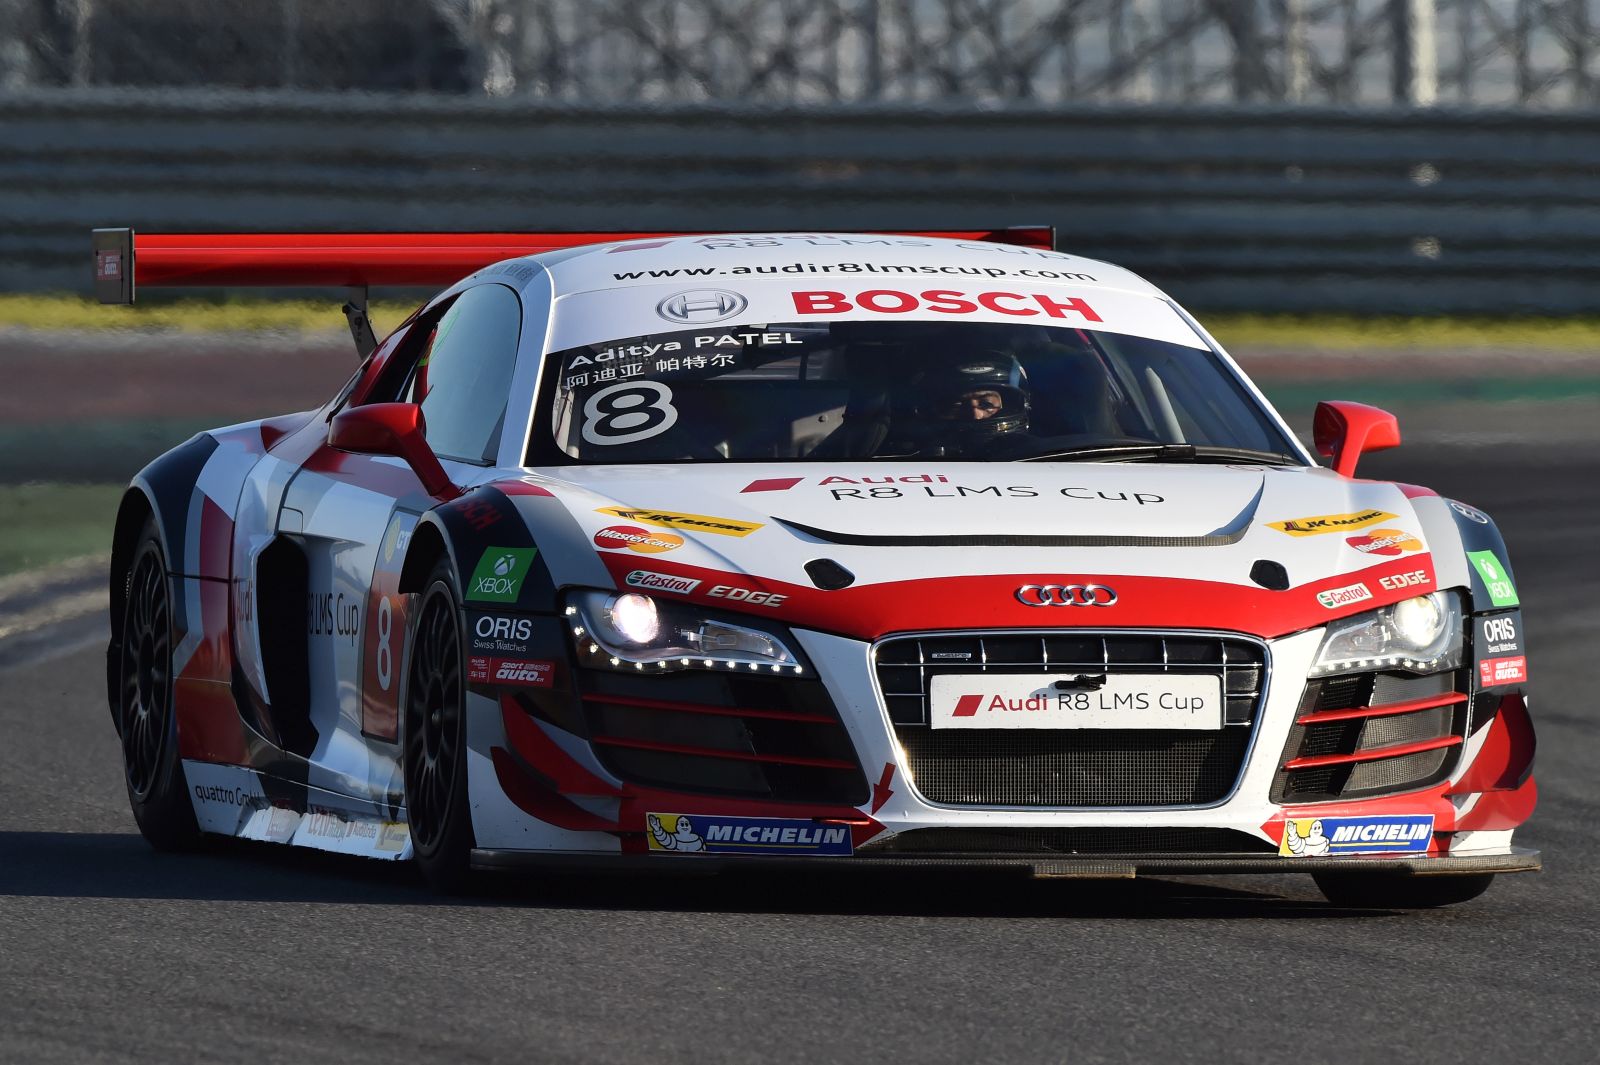 Aditya-Patel-to-compete-in-Audi-R8-LMS-Cup-for-second-year-in-a-row-2